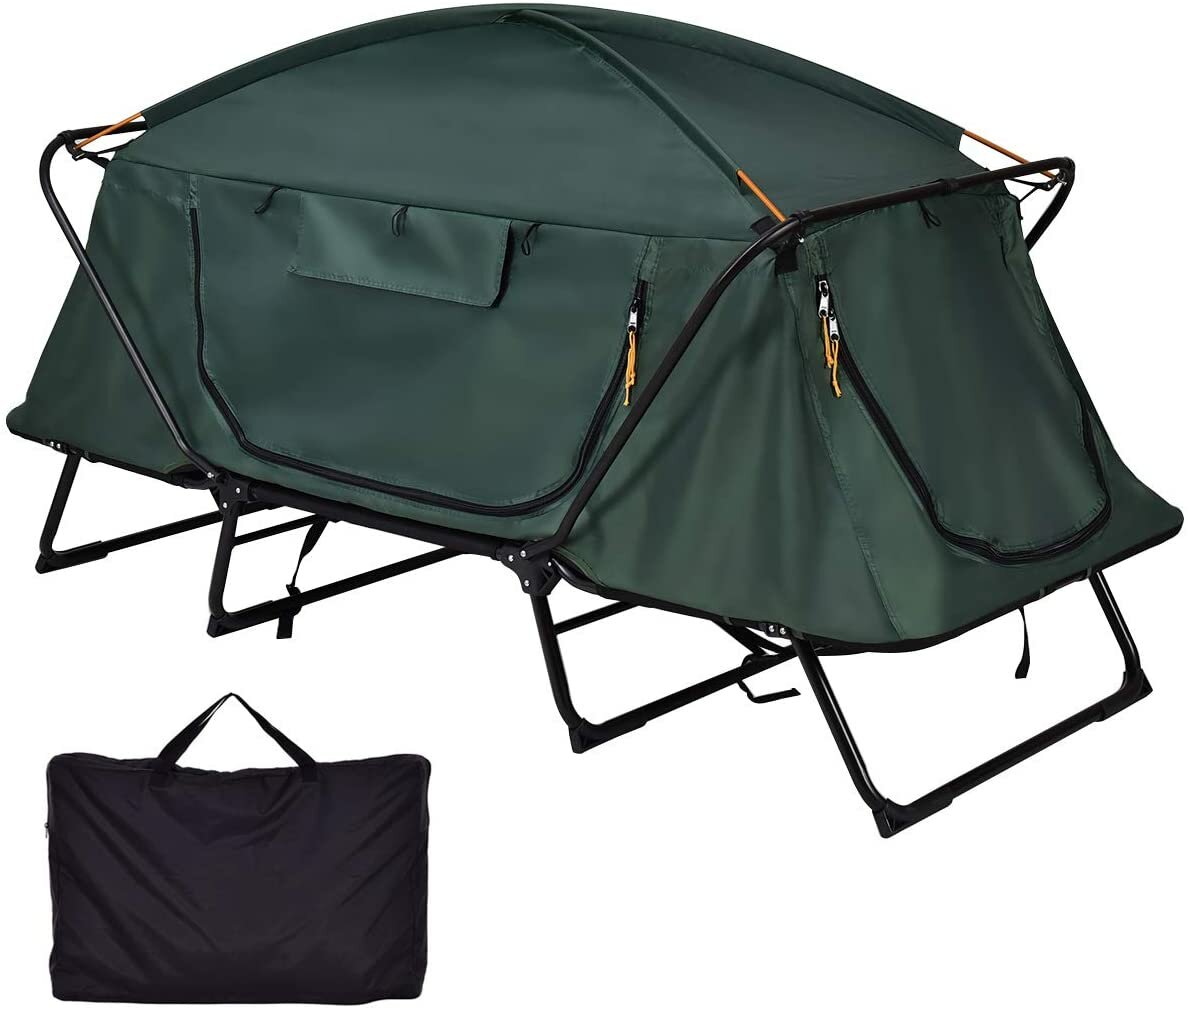 2 Person Camping Tent Off The Ground Folding Waterproof Double Layer Cold Protection Anti-wind Sunshade Dome Canopy Hiking Travel with Carry Bag